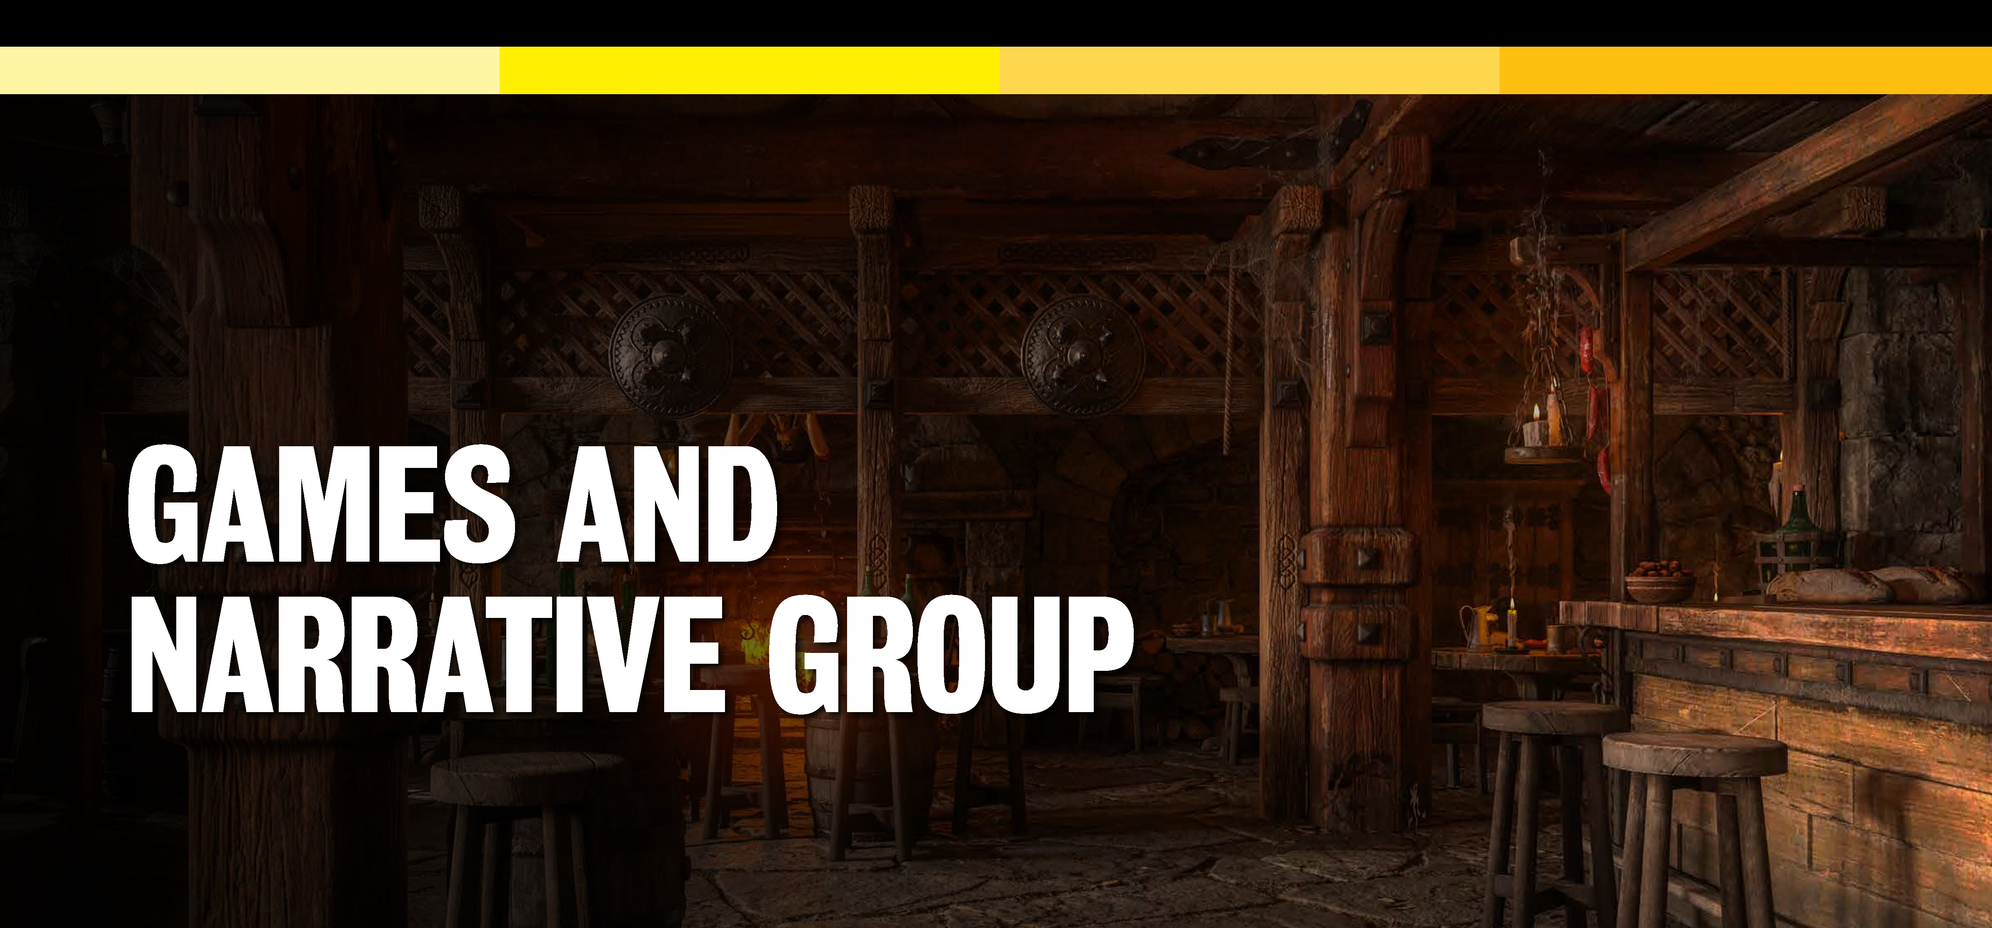 Games and Narrative Group banner